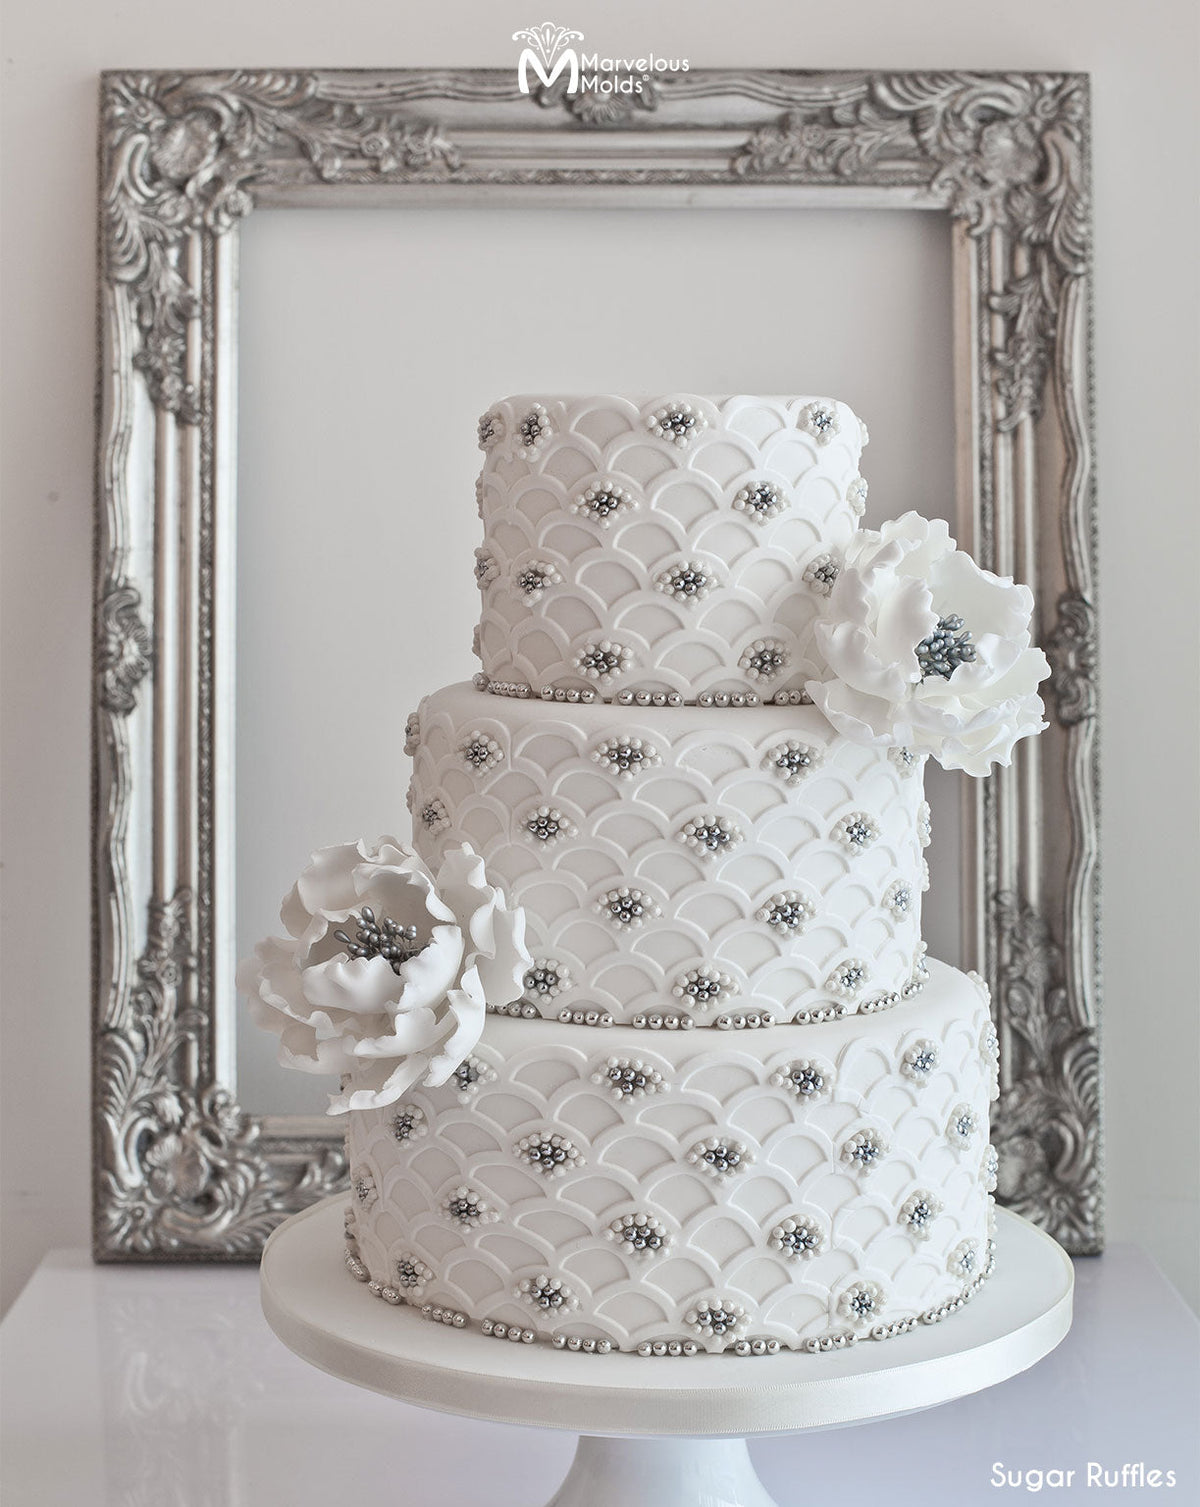 White Wedding Cake with Lattice and Pearl Detail, Decorated Using the Marvelous Molds Scalloped Lattice Silicone Onlay Cake Stencil Food Safe Mold